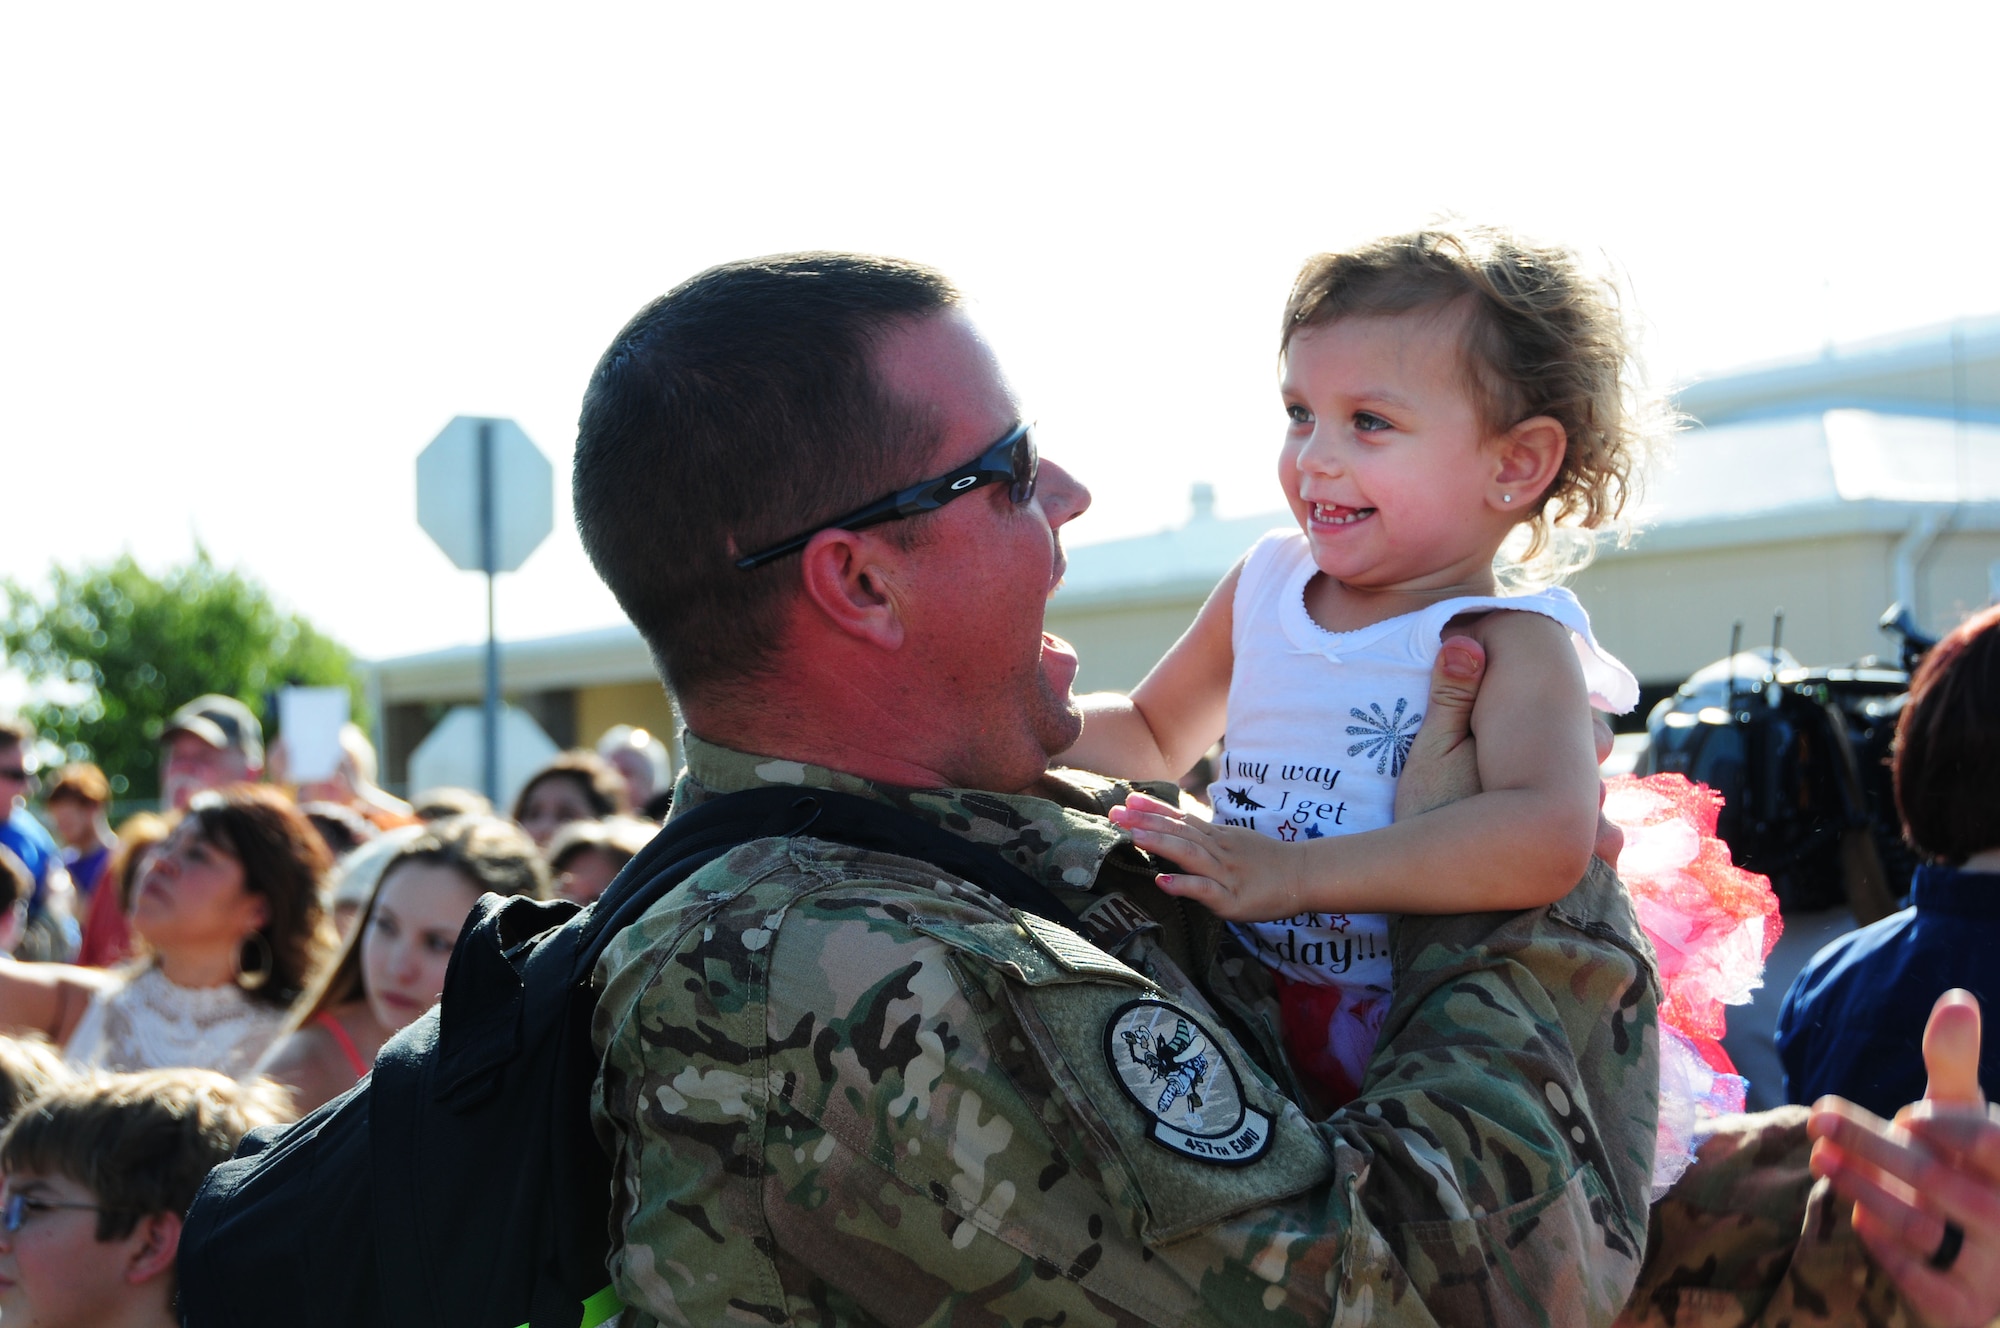 FORT WORTH, Texas - A 301st Fighter Wing Airman greets his daughter Aug. 8 at Naval Air Station Fort Worth Joint Reserve Base during the 301st Fighter Wing Homecoming from Operation Freedom’s Sentinel.  Operation Freedom's Sentinel aims to maintain security and stability in Afghanistan.  (U.S. Navy photo by Mass Communication Specialist 2nd Class Jason Howard/Released)